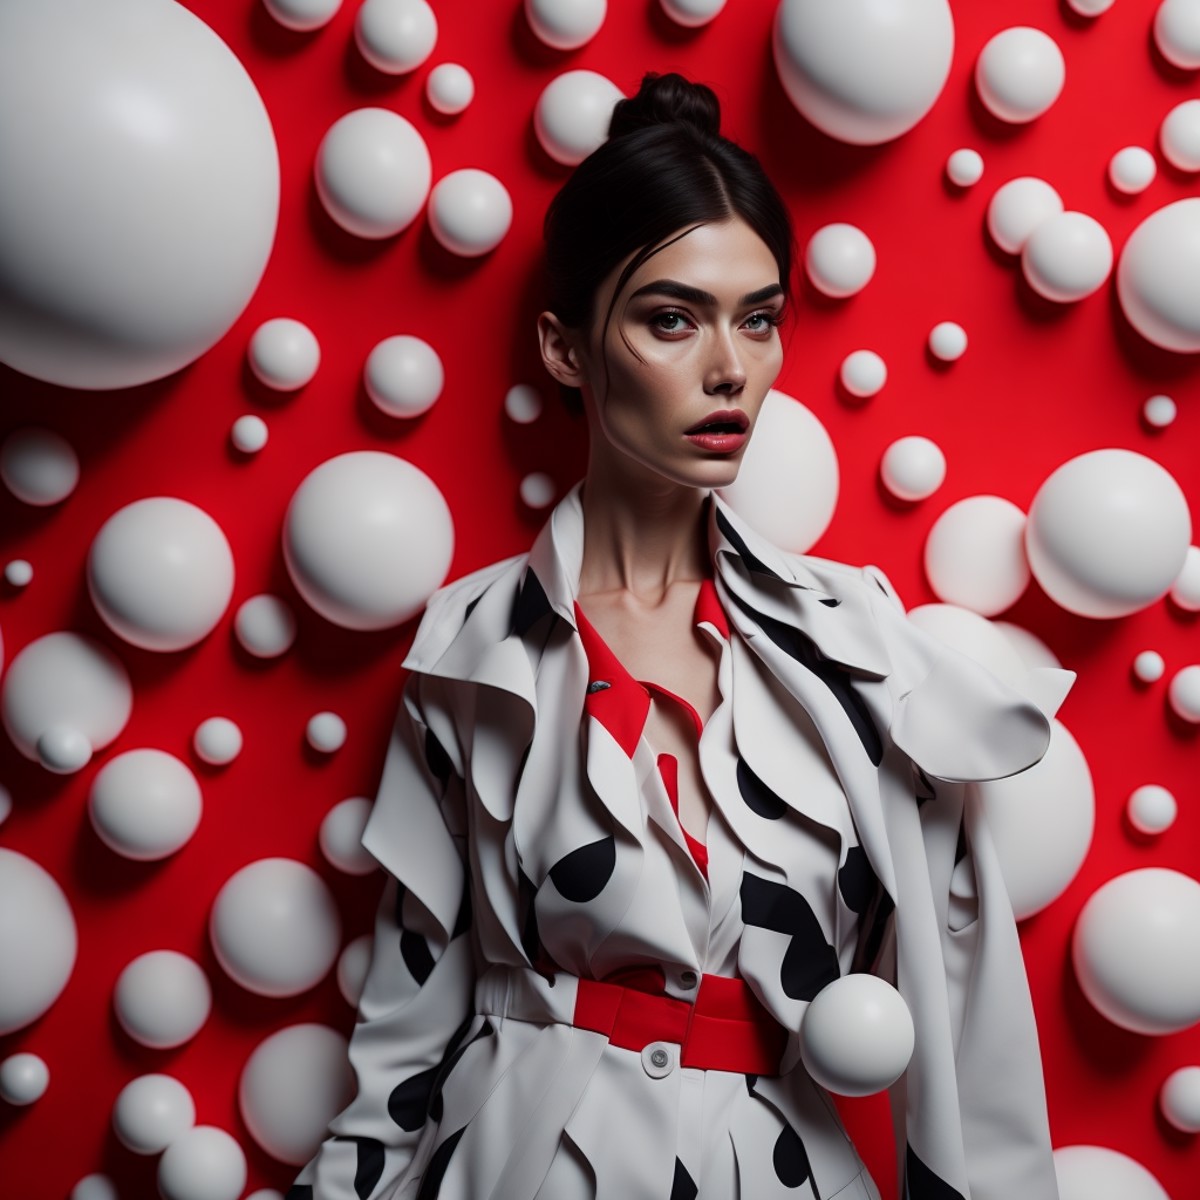 a woman standing in front of a red and white circle with white balls on it and a red and white polka dot pattern on the ba...